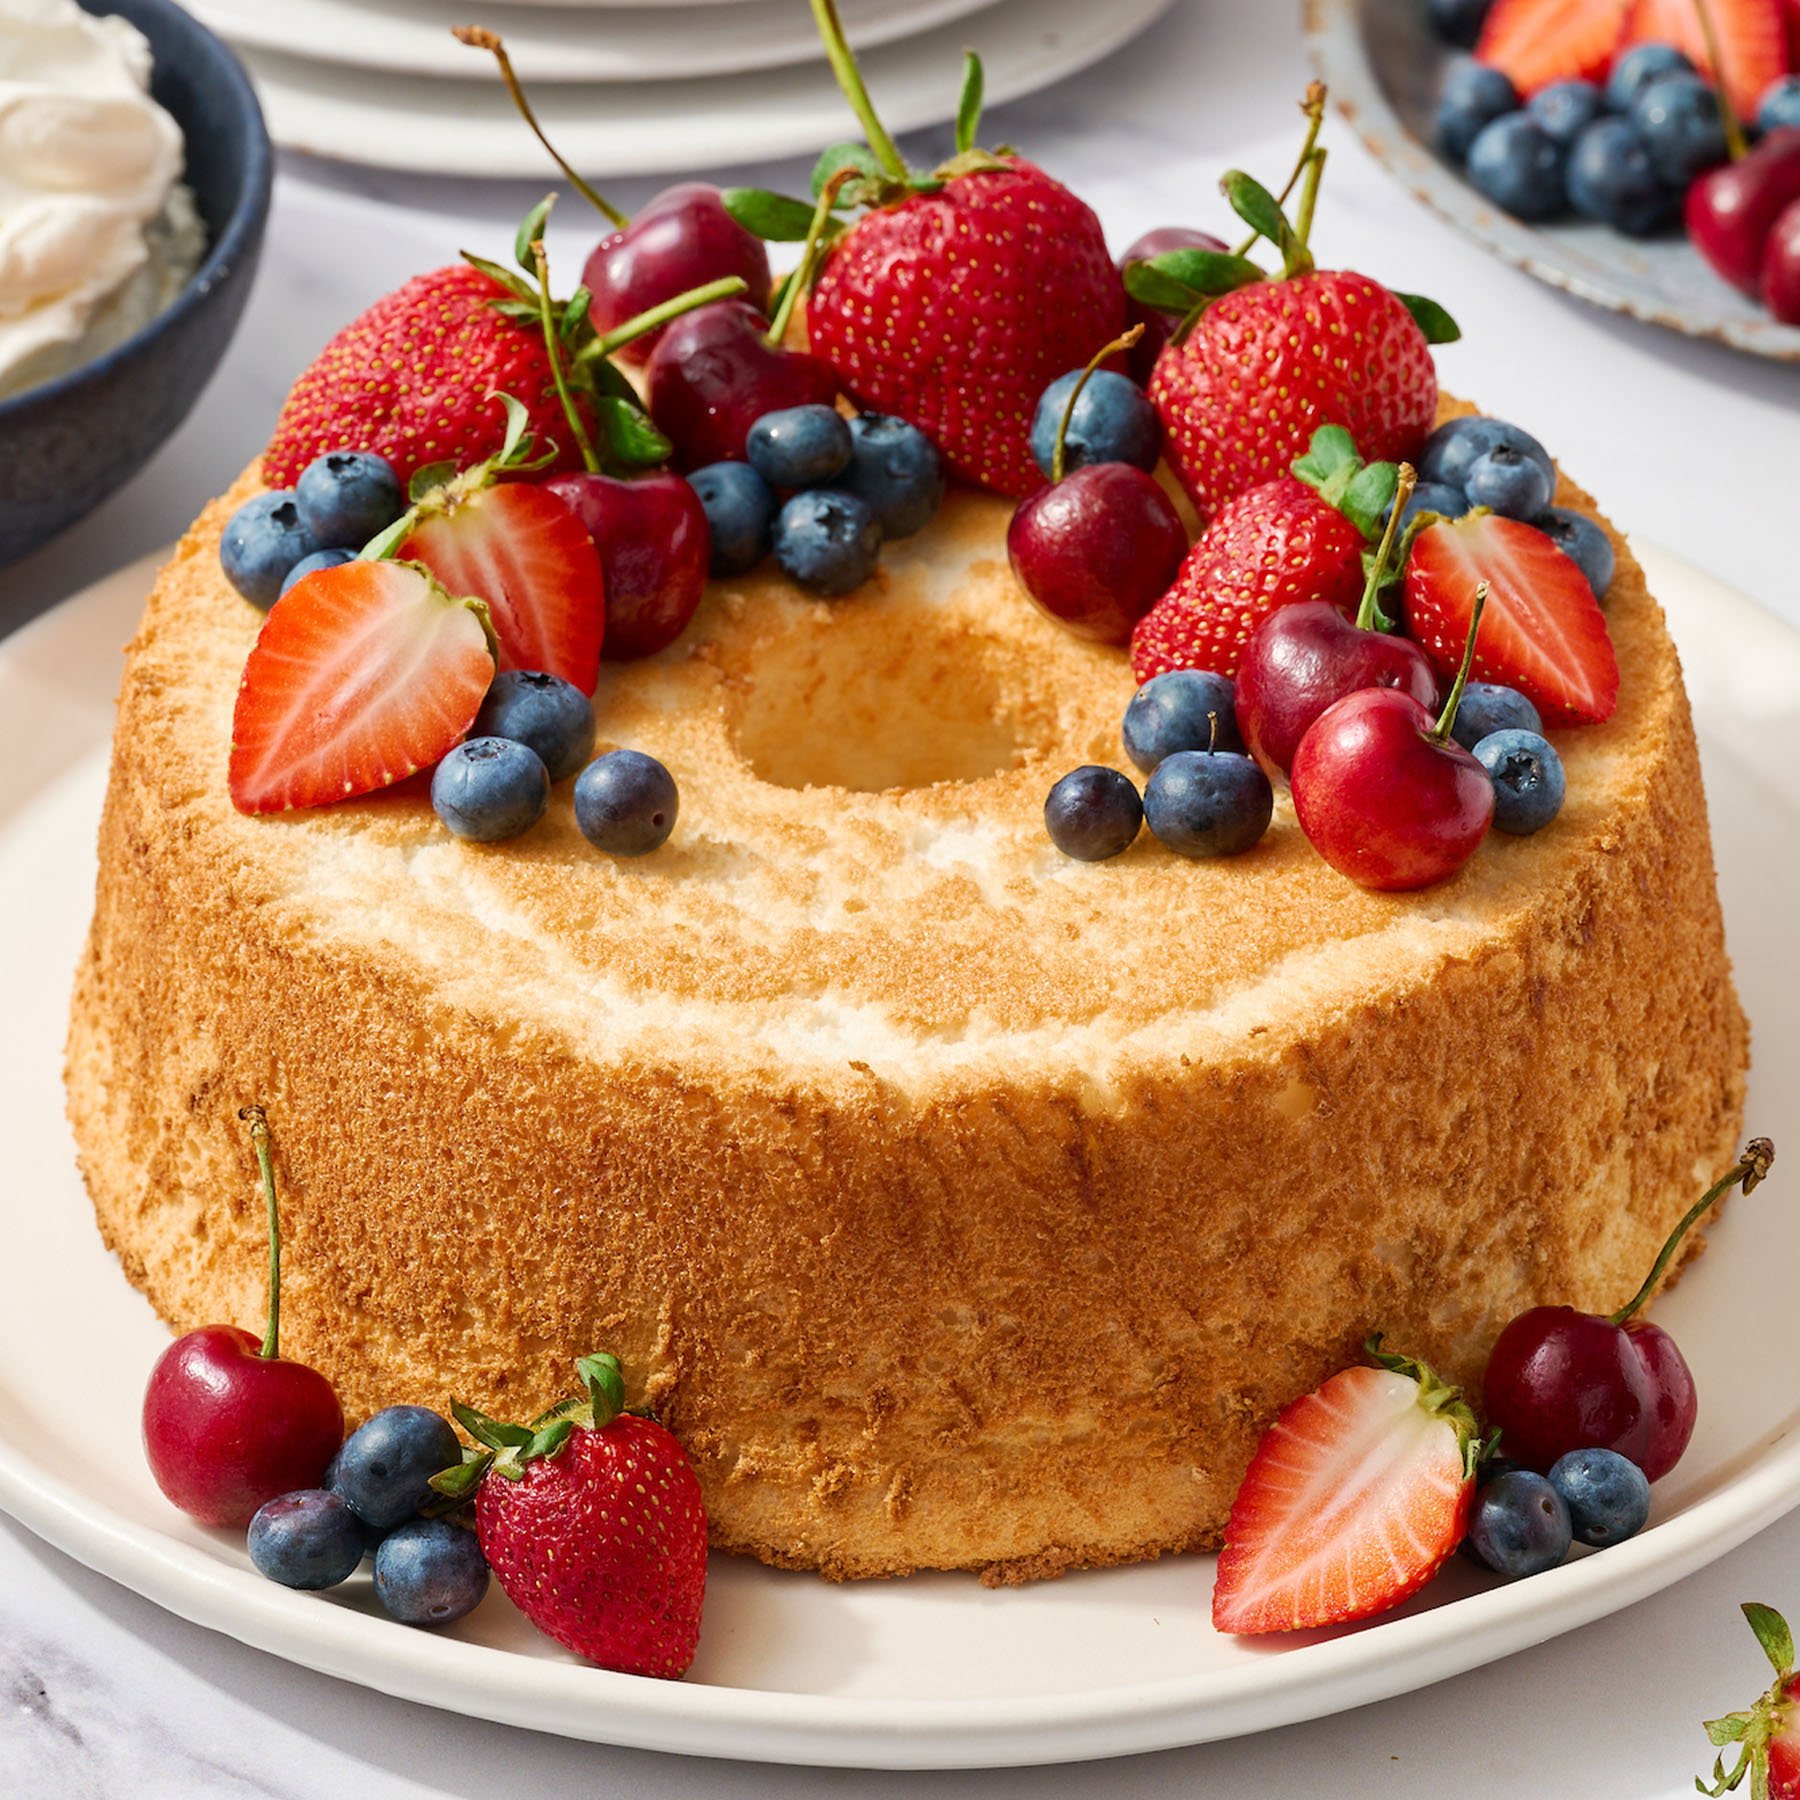 Details more than 65 angel food cake images latest